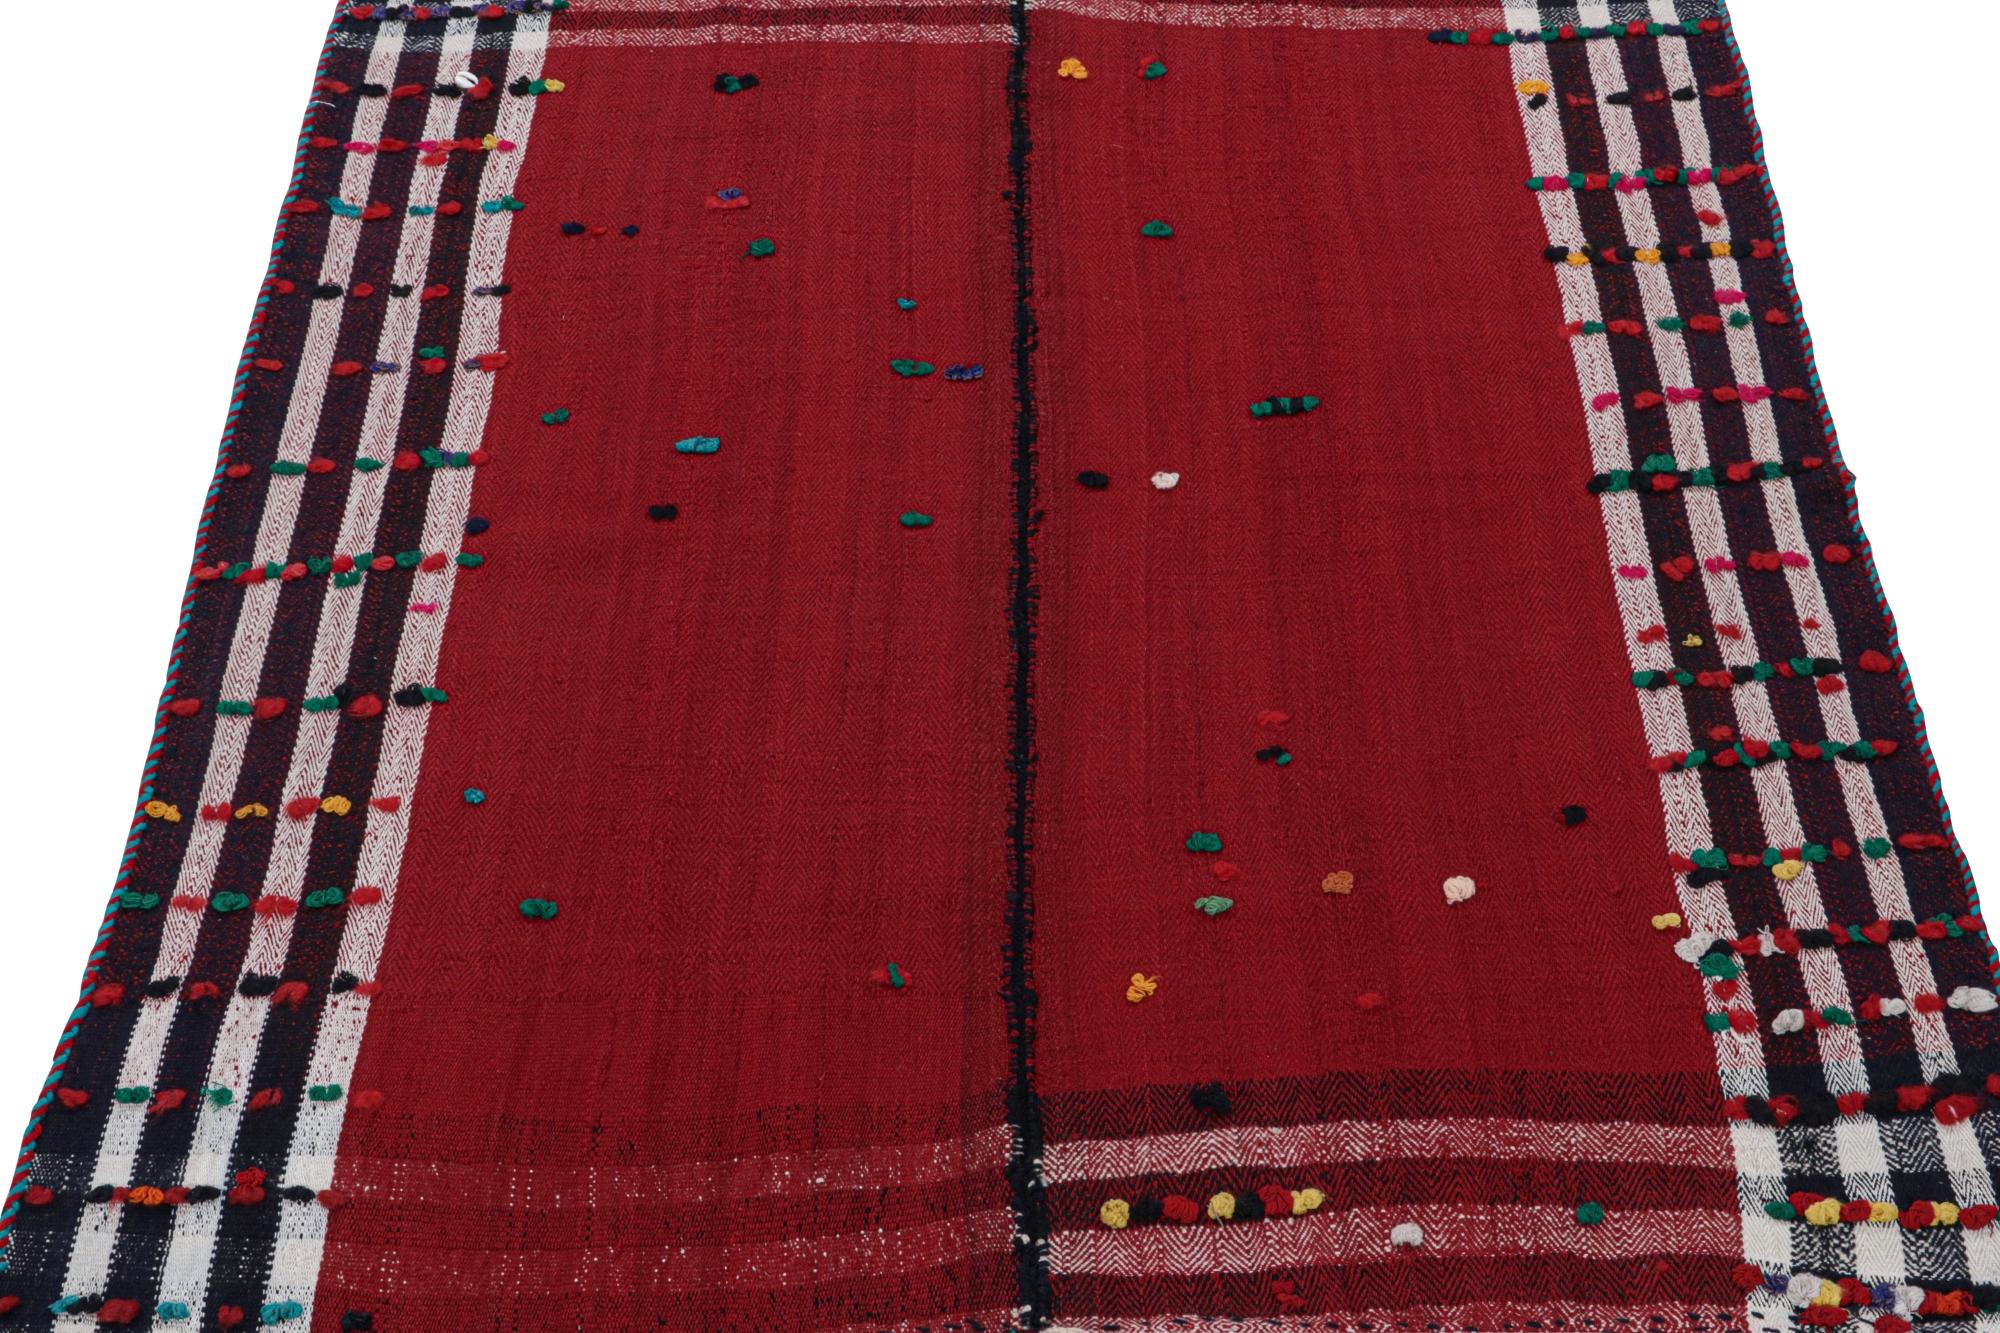 This vintage 5x5 Persian Kilim is believed to be a midcentury tribal rug, handwoven in wool circa 1950-1960.

On the Design: 

This Persian remarks the panel-weaving technique, in which tribal weavers combine multiple pieces into a larger flat